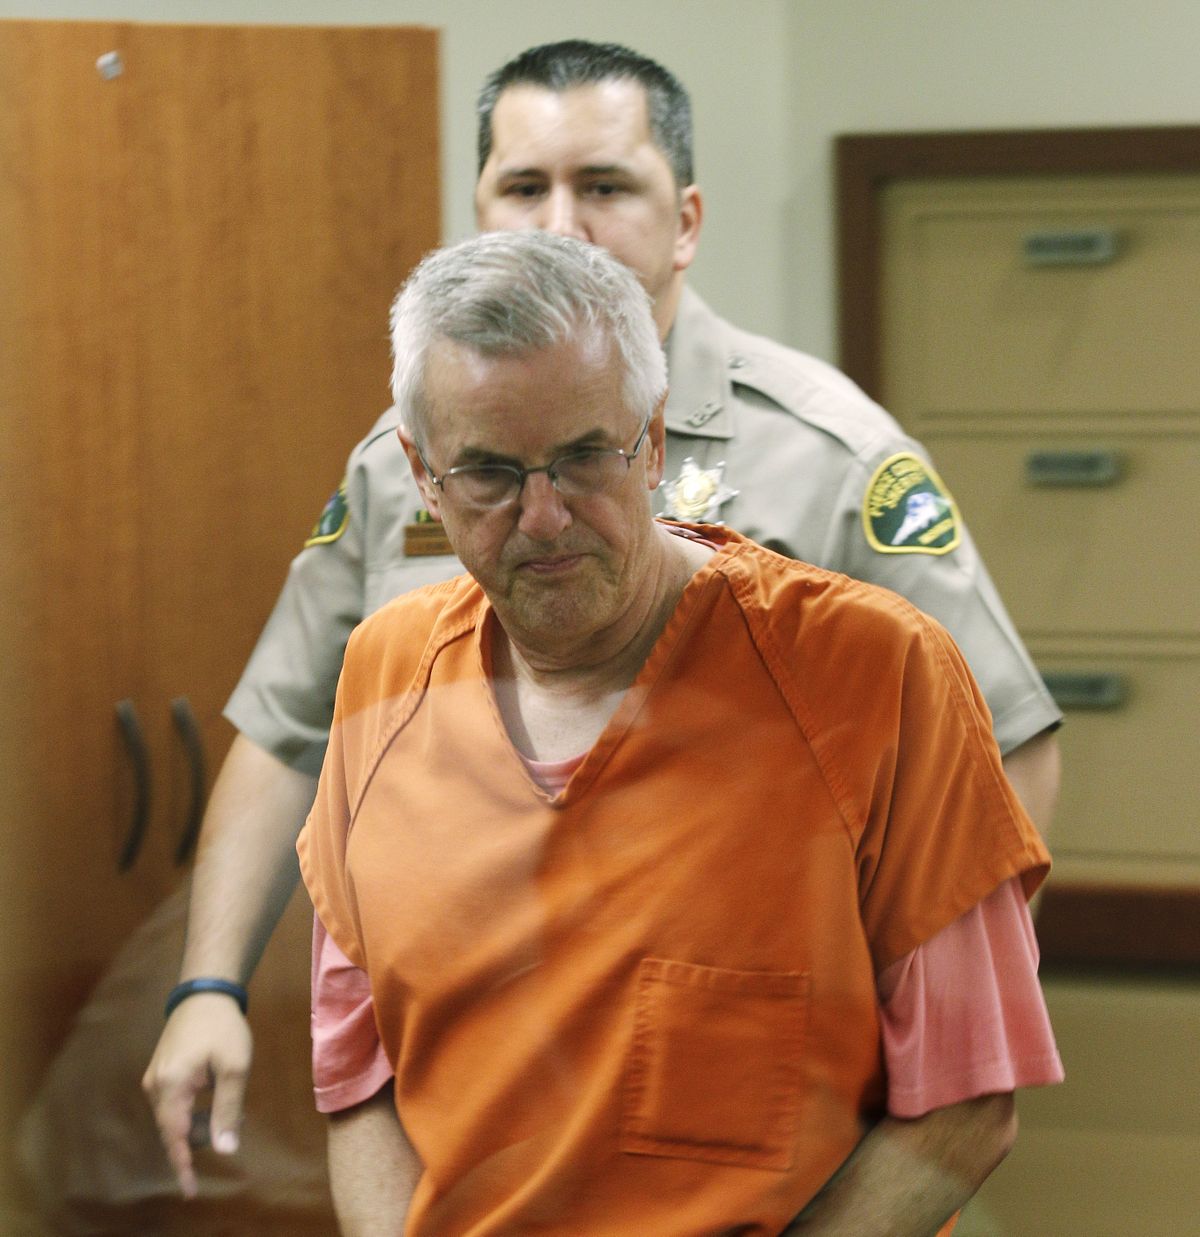 Steven Powell, father-in-law of missing Susan Powell, appears in a Pierce County courtroom Friday. (Associated Press)